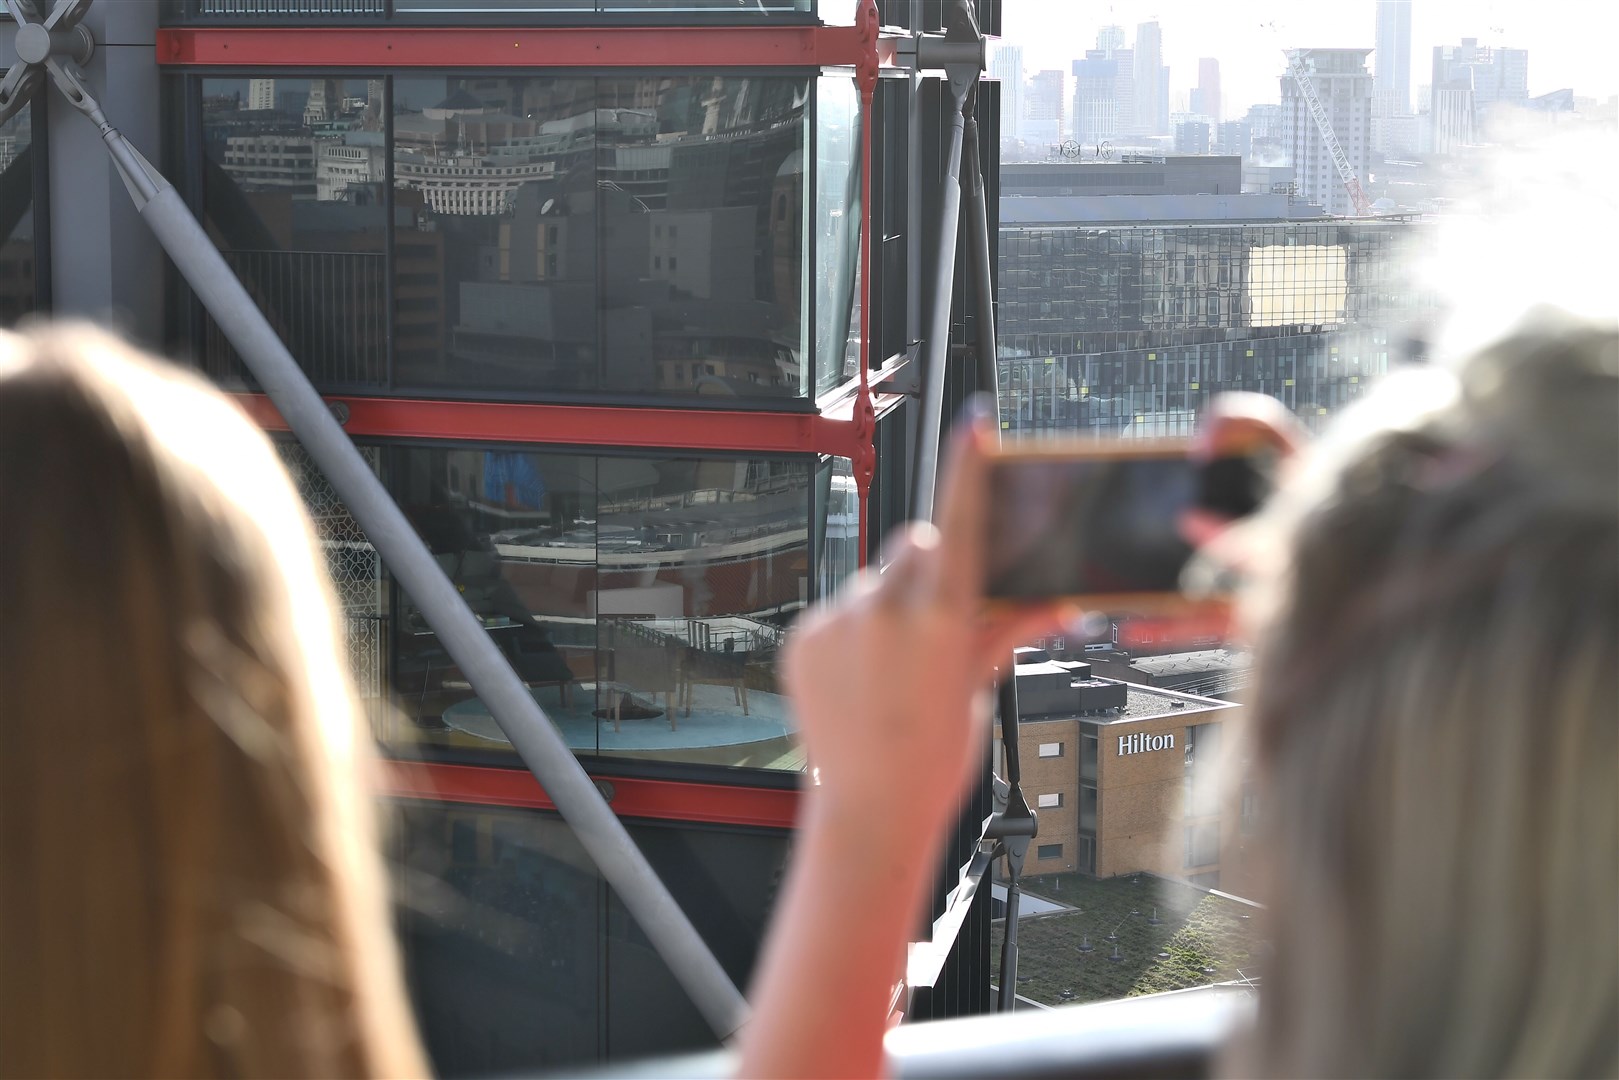 People take pictures from the viewing platform at Tate Modern (left), which overlooks the residential flats (right) (Victoria Jones/PA)